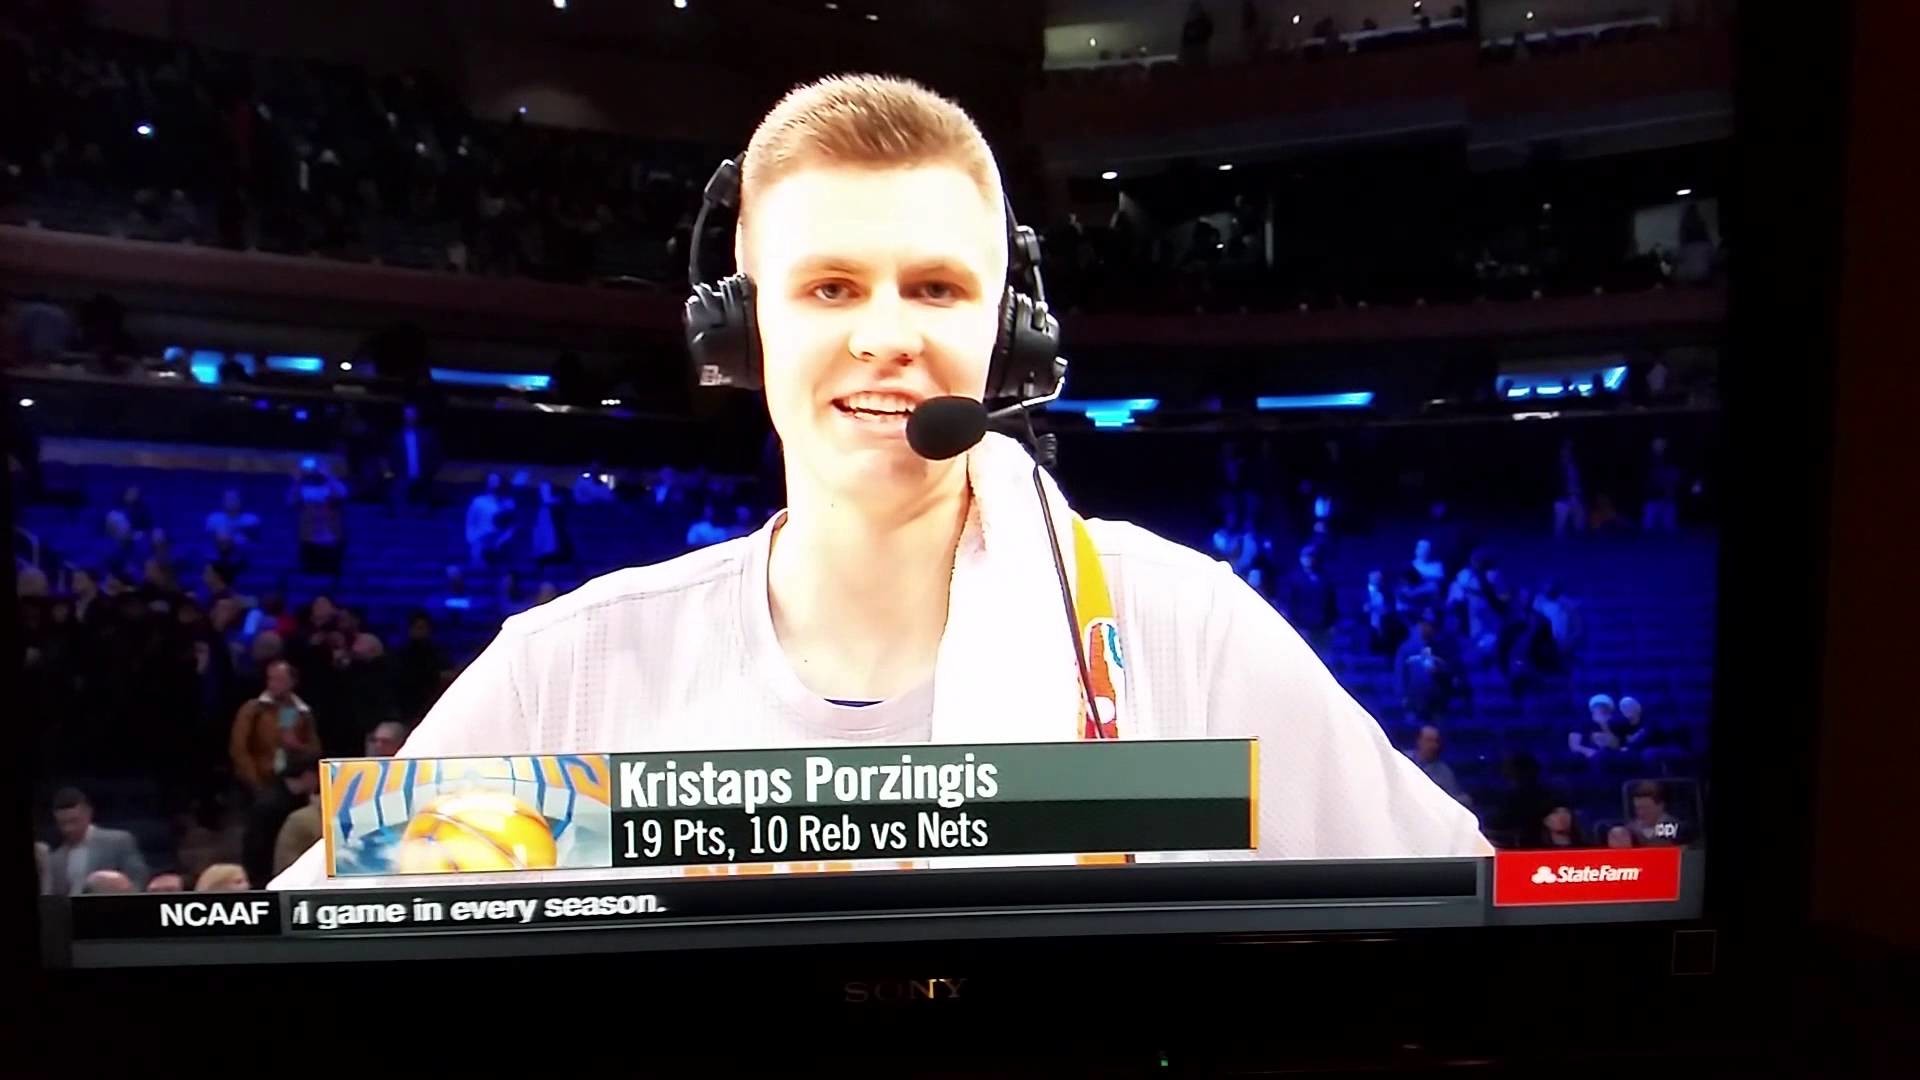 1920x1080 Kristaps Porzingis continues to be awesome